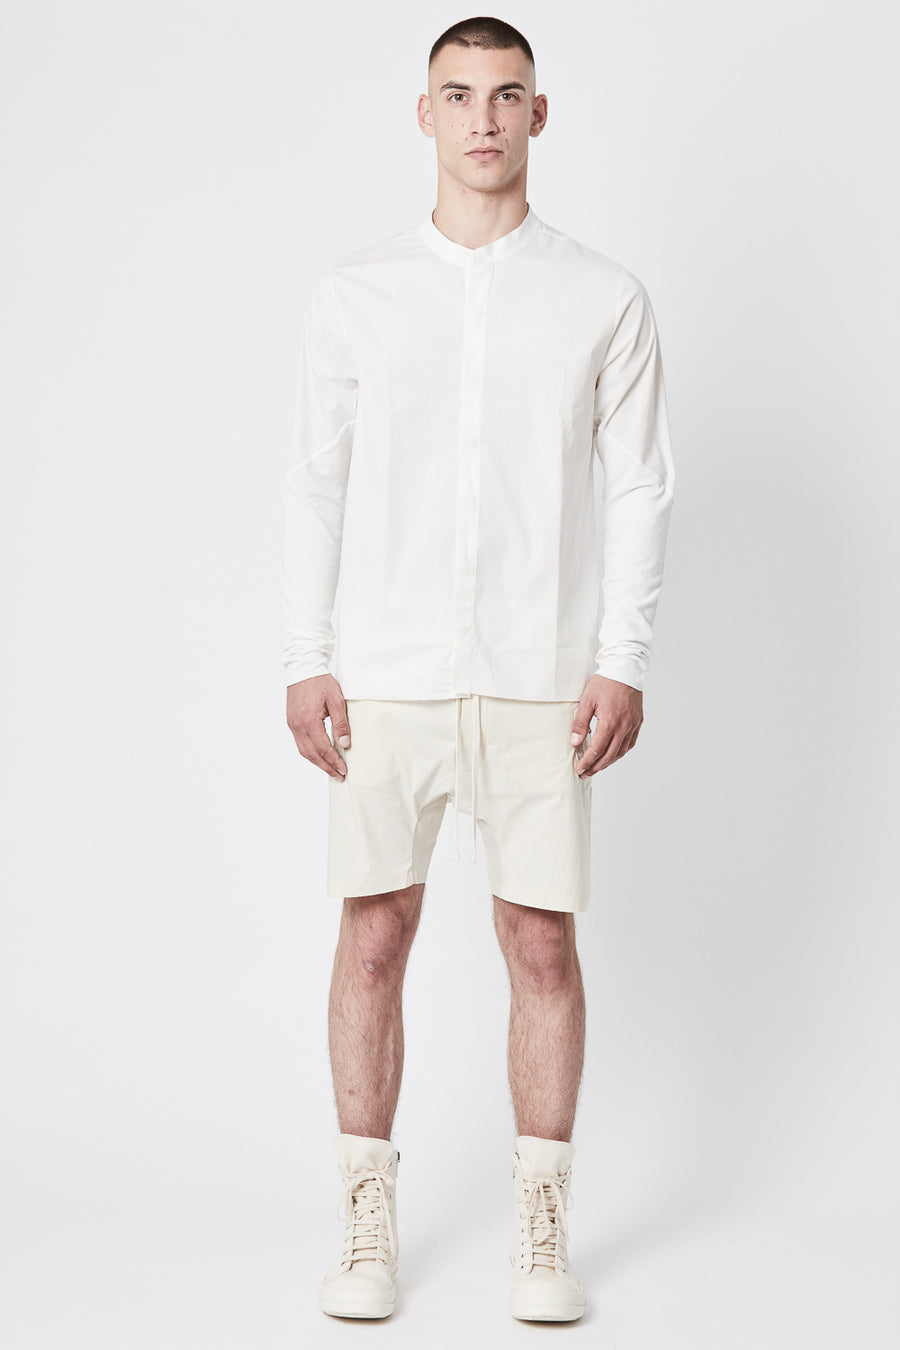 Buy the Thom Krom M H 135 Shirt in Off White at Intro. Spend £50 for free UK delivery. Official stockists. We ship worldwide.